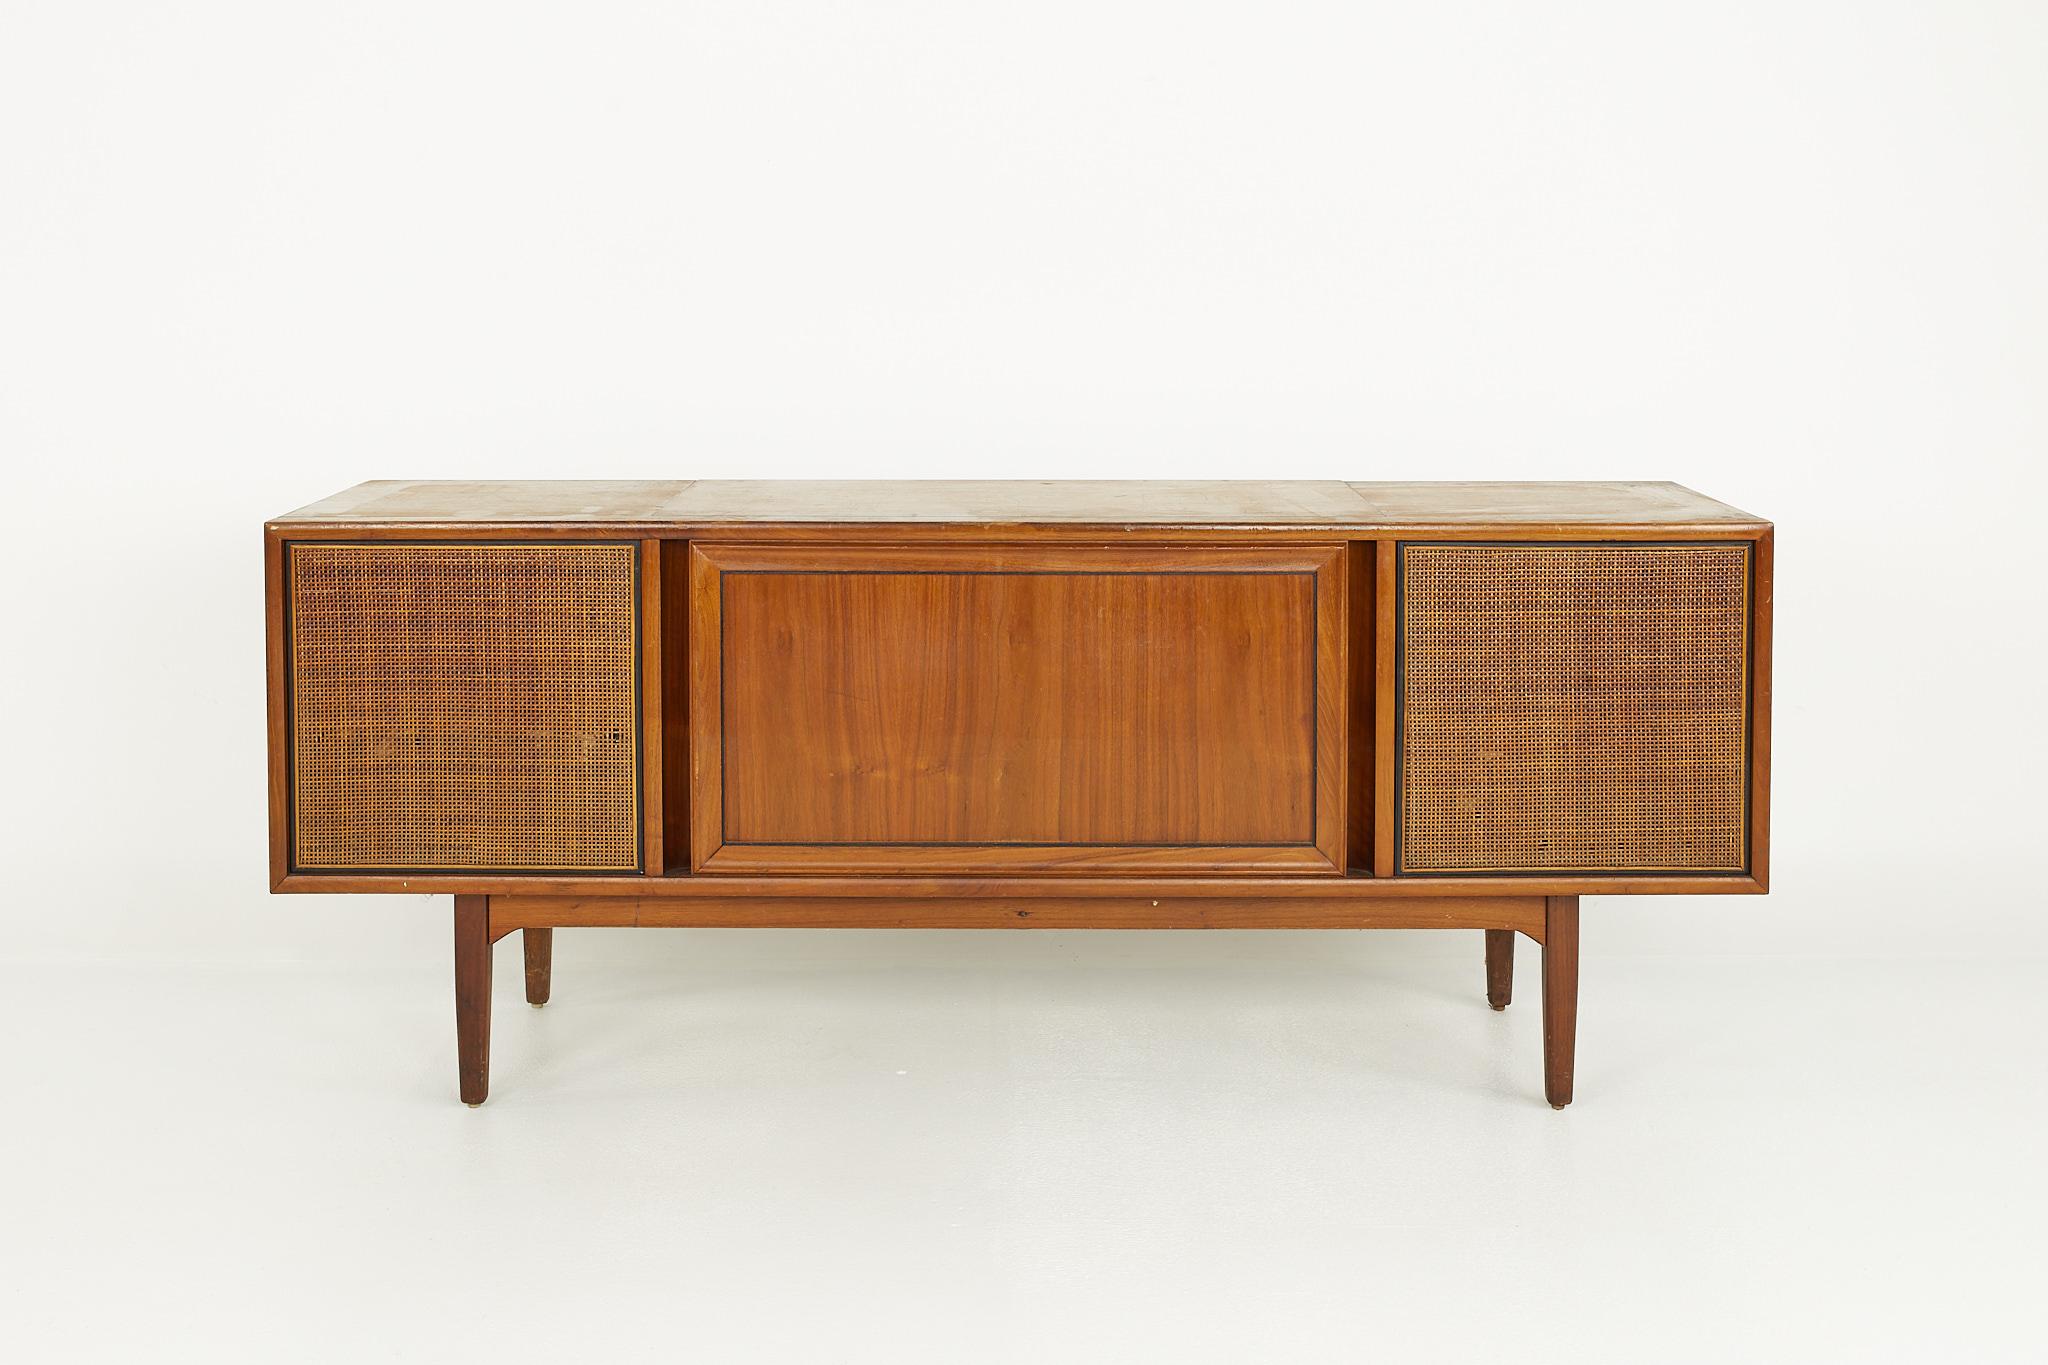 Drexel Declaration mid century walnut stereo console

This console measures: 66 wide x 17.75 deep x 26.75 inches high

?All pieces of furniture can be had in what we call restored vintage condition. That means the piece is restored upon purchase